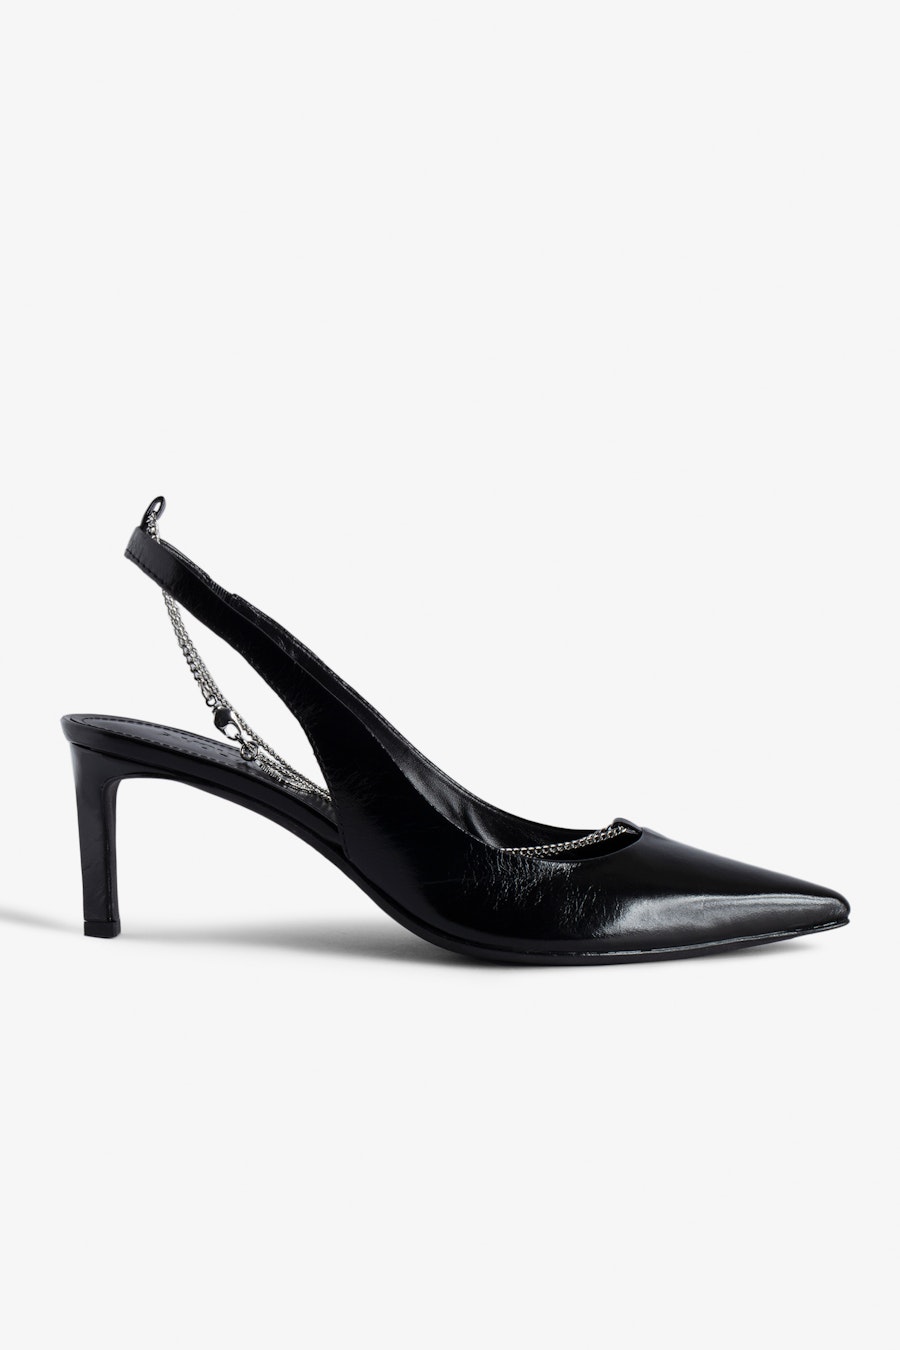 ZADIG&VOLTAIRE First Night Court Shoes